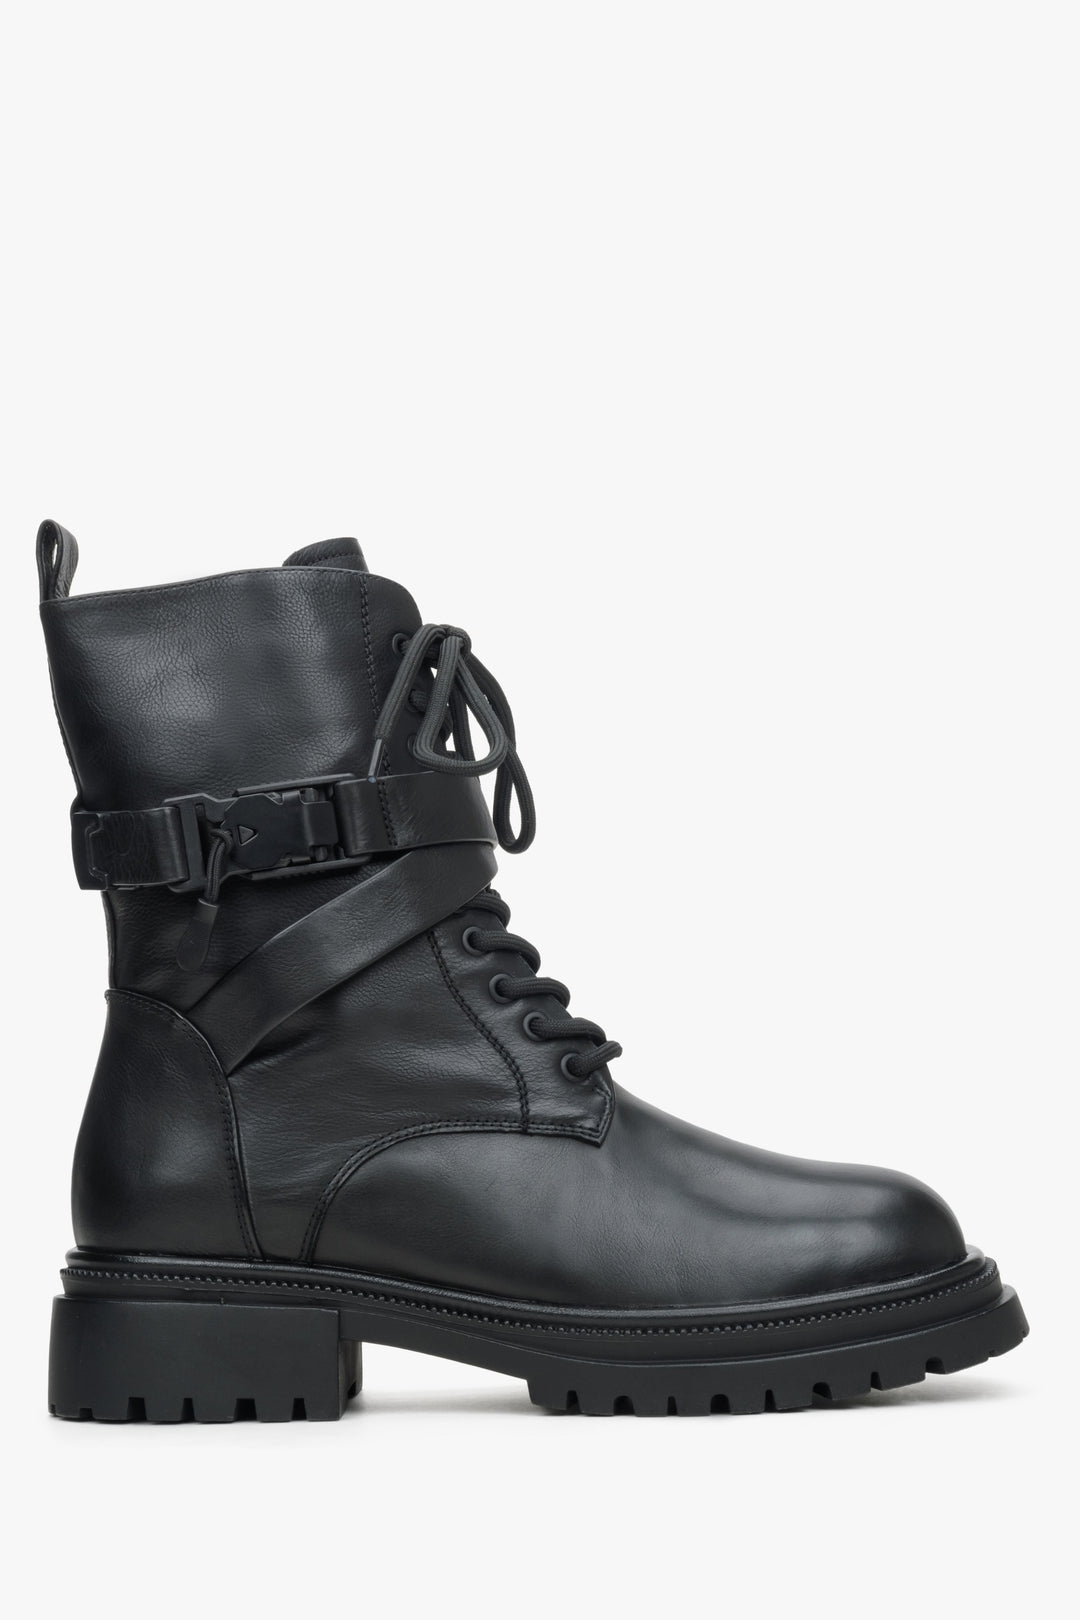 Women's Black Boots made of Genuine Leather with Decorative Straps Estro ER00114242.